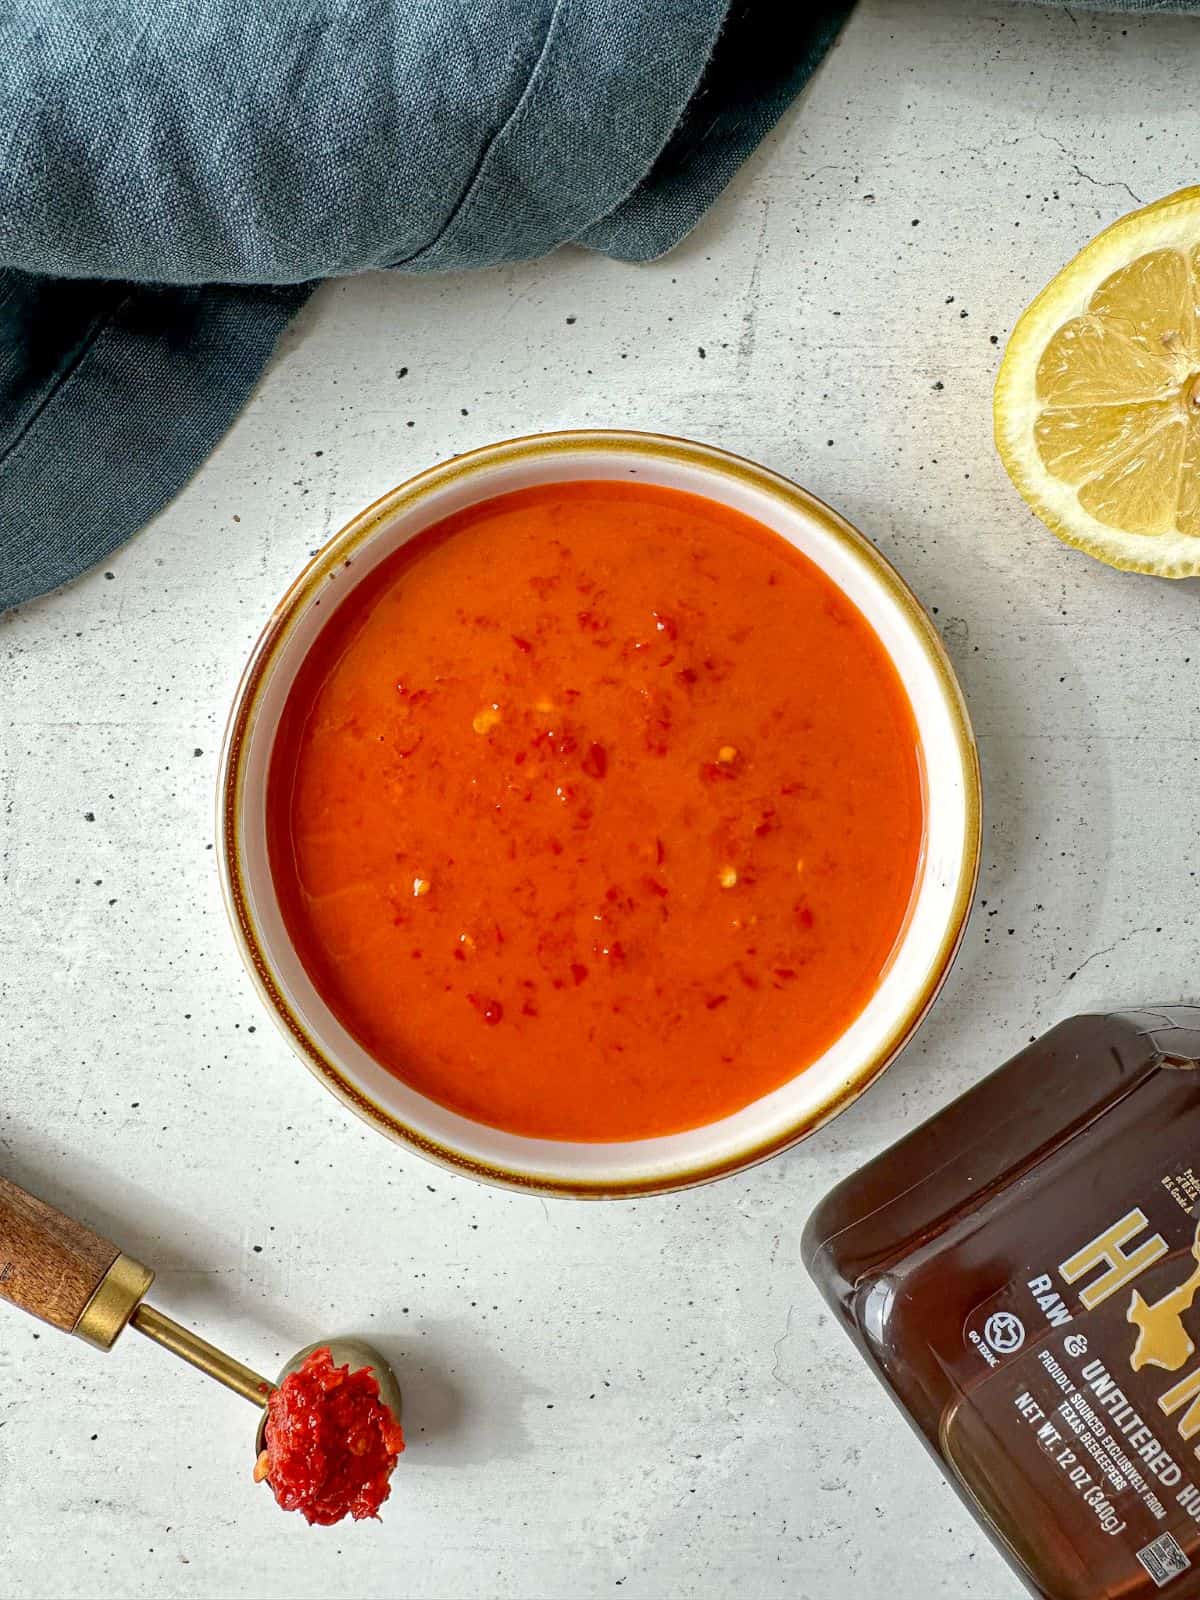 Orange-red colored harissa vinaigrette in a white bowl surrounded by a sliced lemon, jar of honey, and measuring spoon of harissa paste.